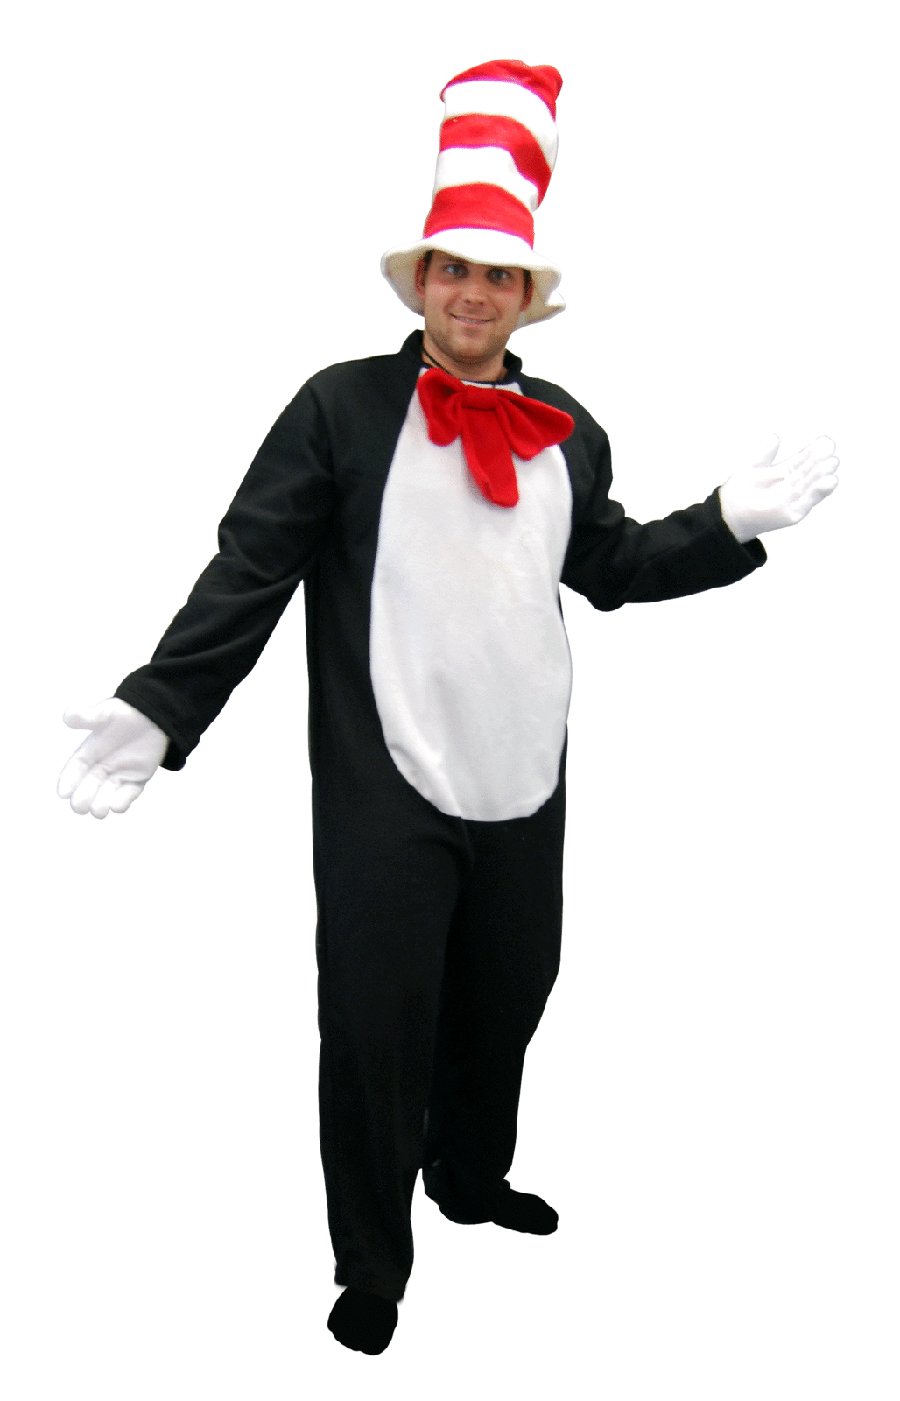 Costume Adult Naughty Cat Onsie Includes Hat, Gloves, Bowtie and Onsie